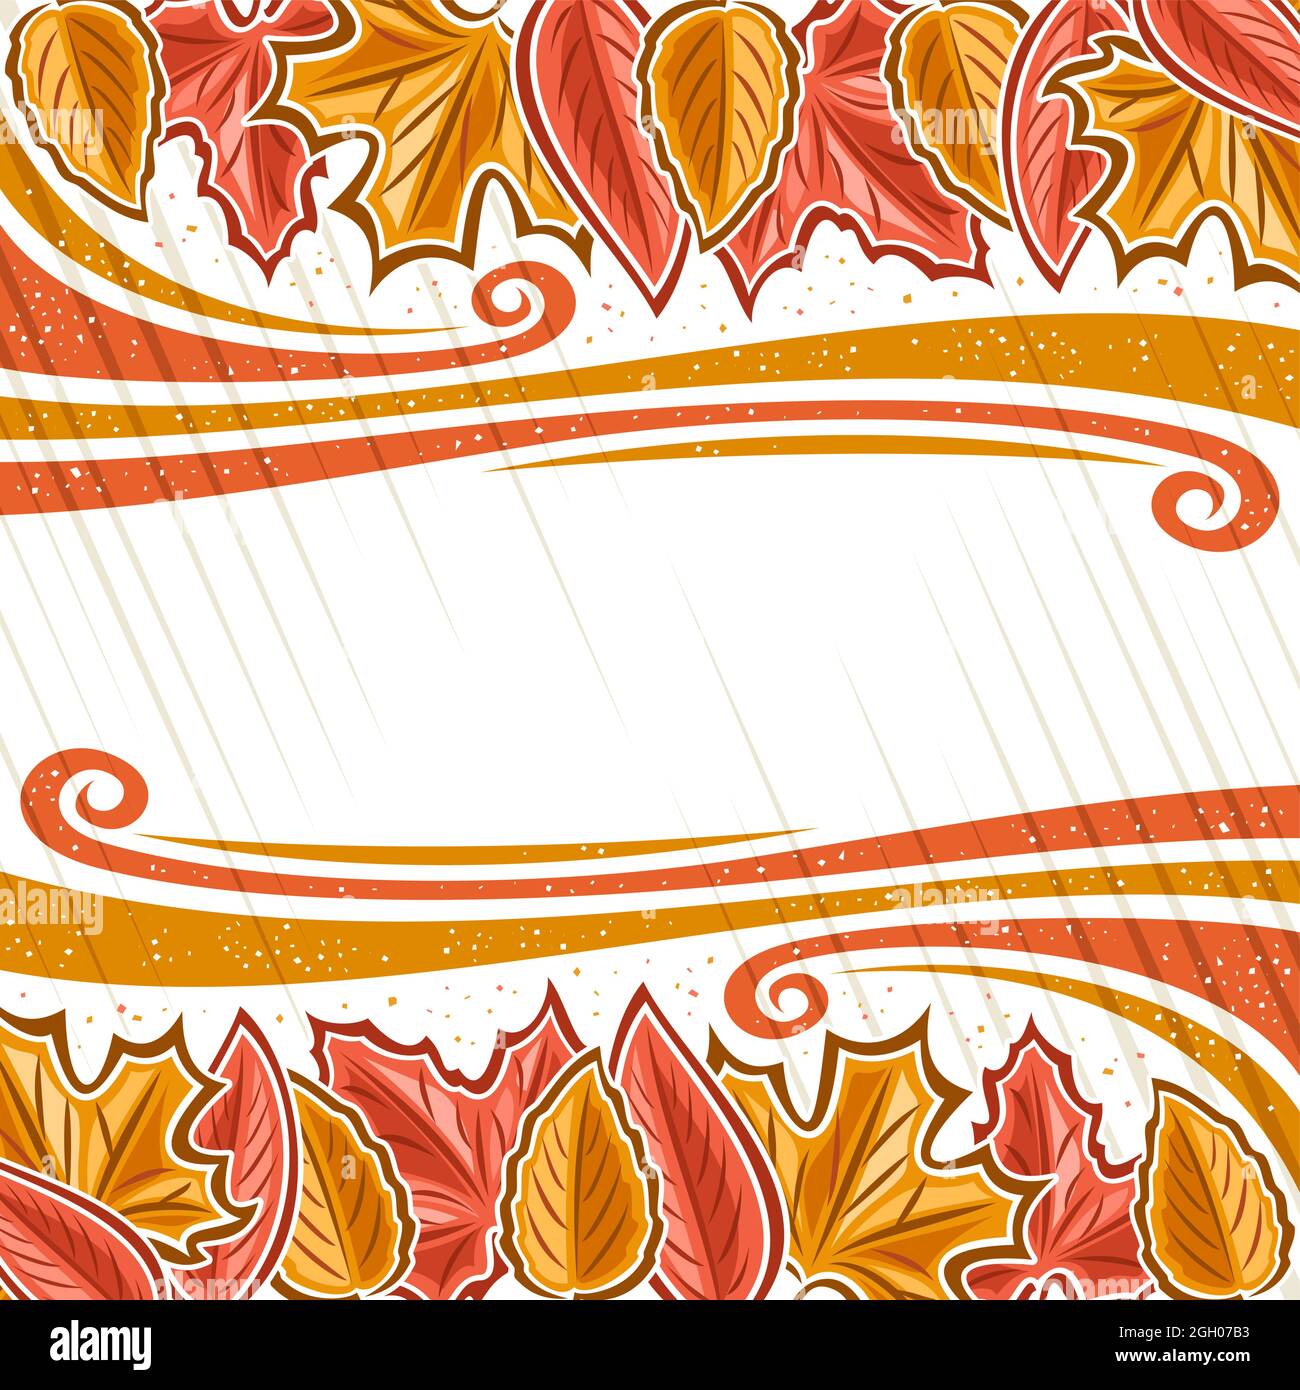 Vector poster for Autumn season with copy space, square placard with illustration of many colorful leaves in a row and vintage decorative flourishes o Stock Vector